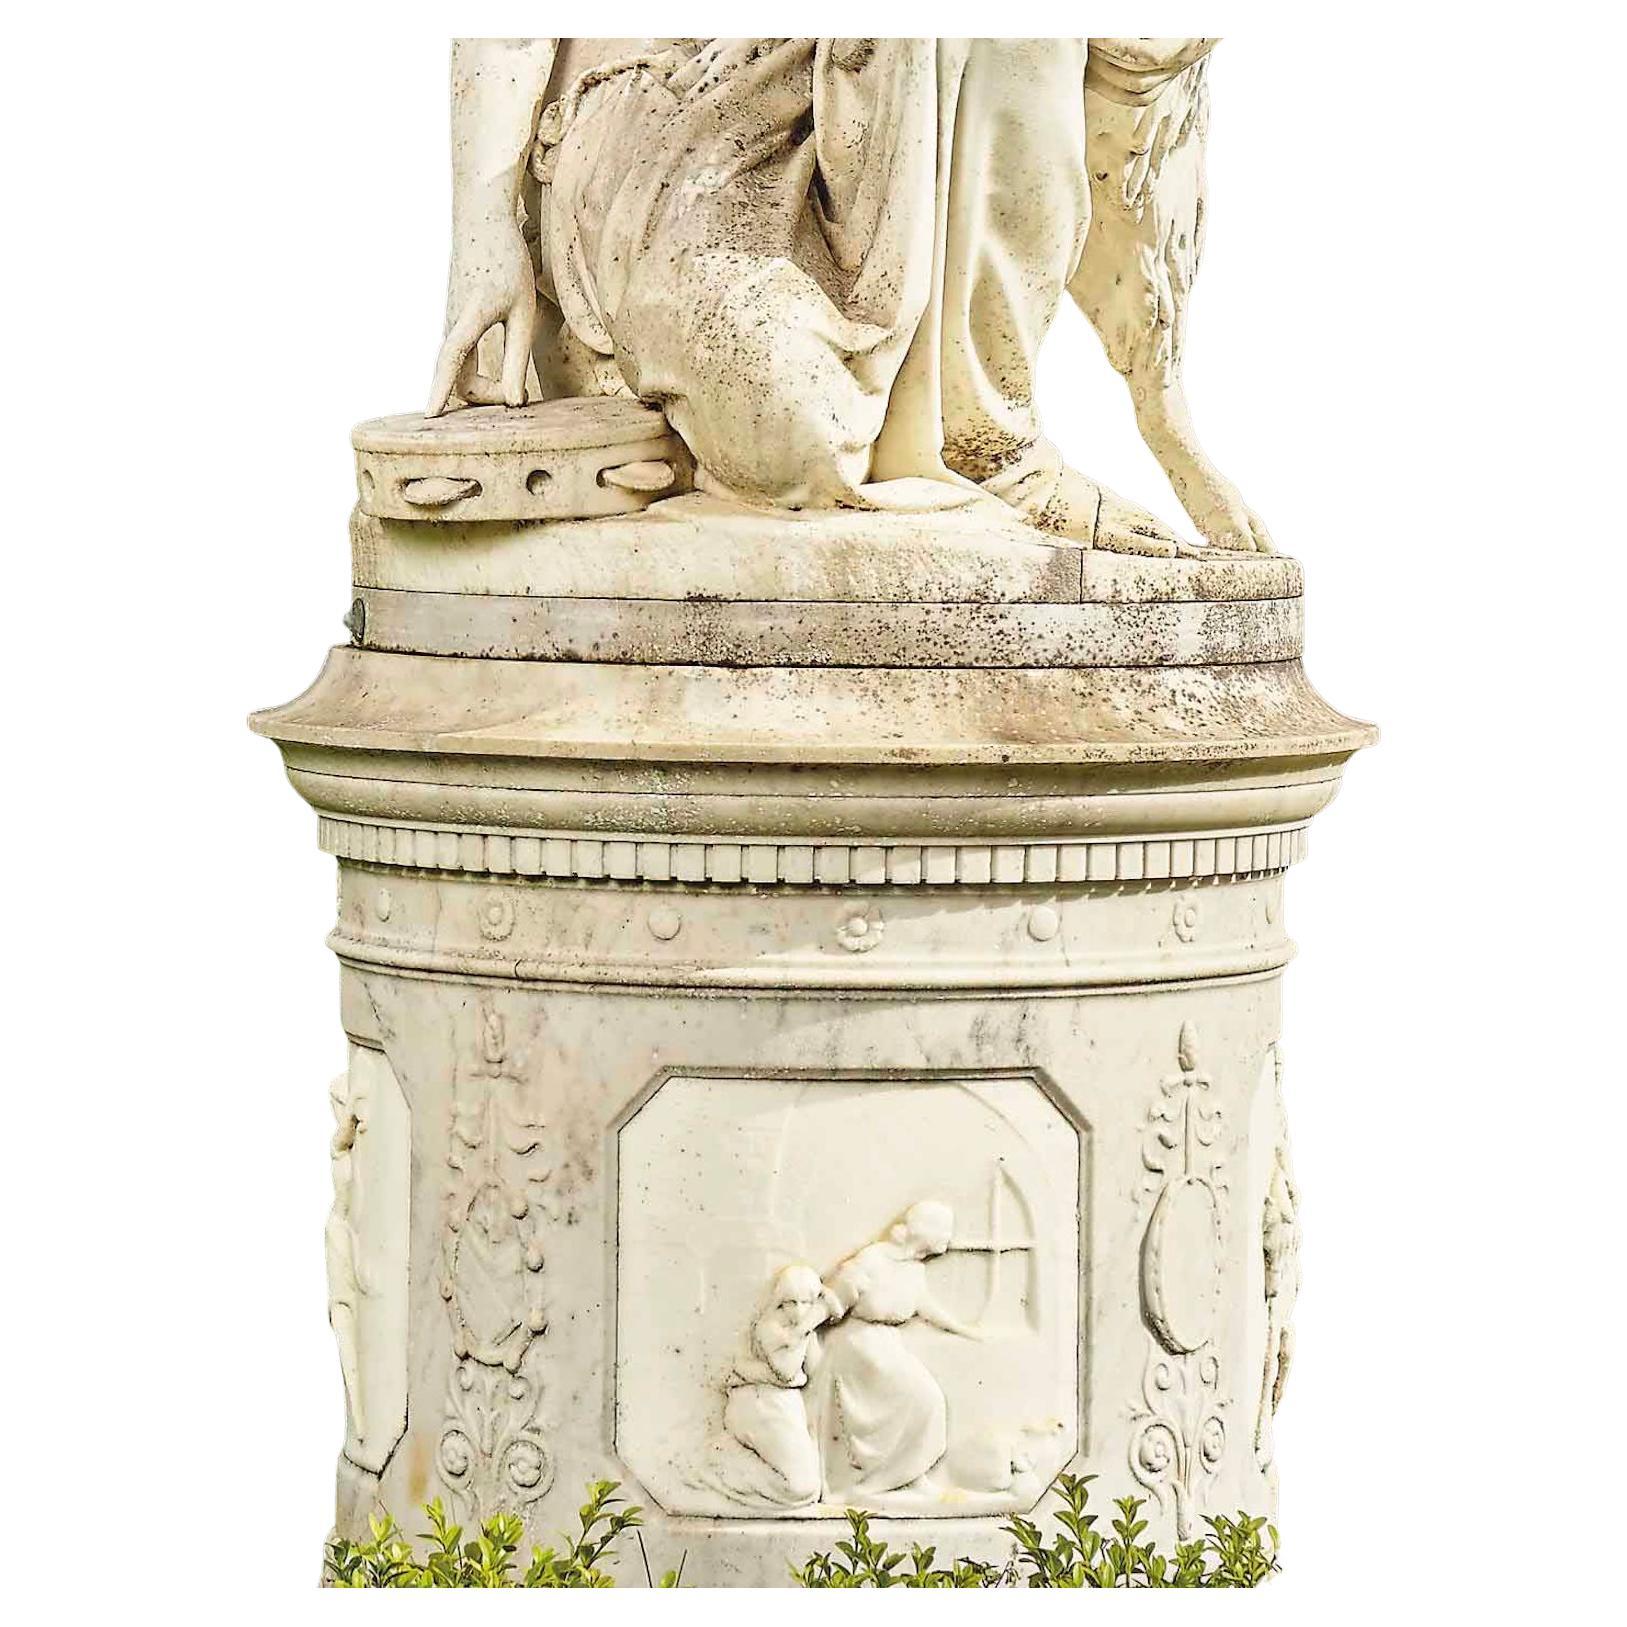 ITEM: FIGURAL GROUP OF ESMERALDA AND THE GOAT, ON PEDESTAL
AUTHOR: ANTONIO ROSSETTI
MATERIAL: WHITE MARBLE
ORIGIN: ROME, ITALY
PERIOD: MID-19TH CENTURY
Dimensions:
The sculpture: 39 ½ in. (100 cm.) high;
The pedestal: 32 in. (81.5 cm.)